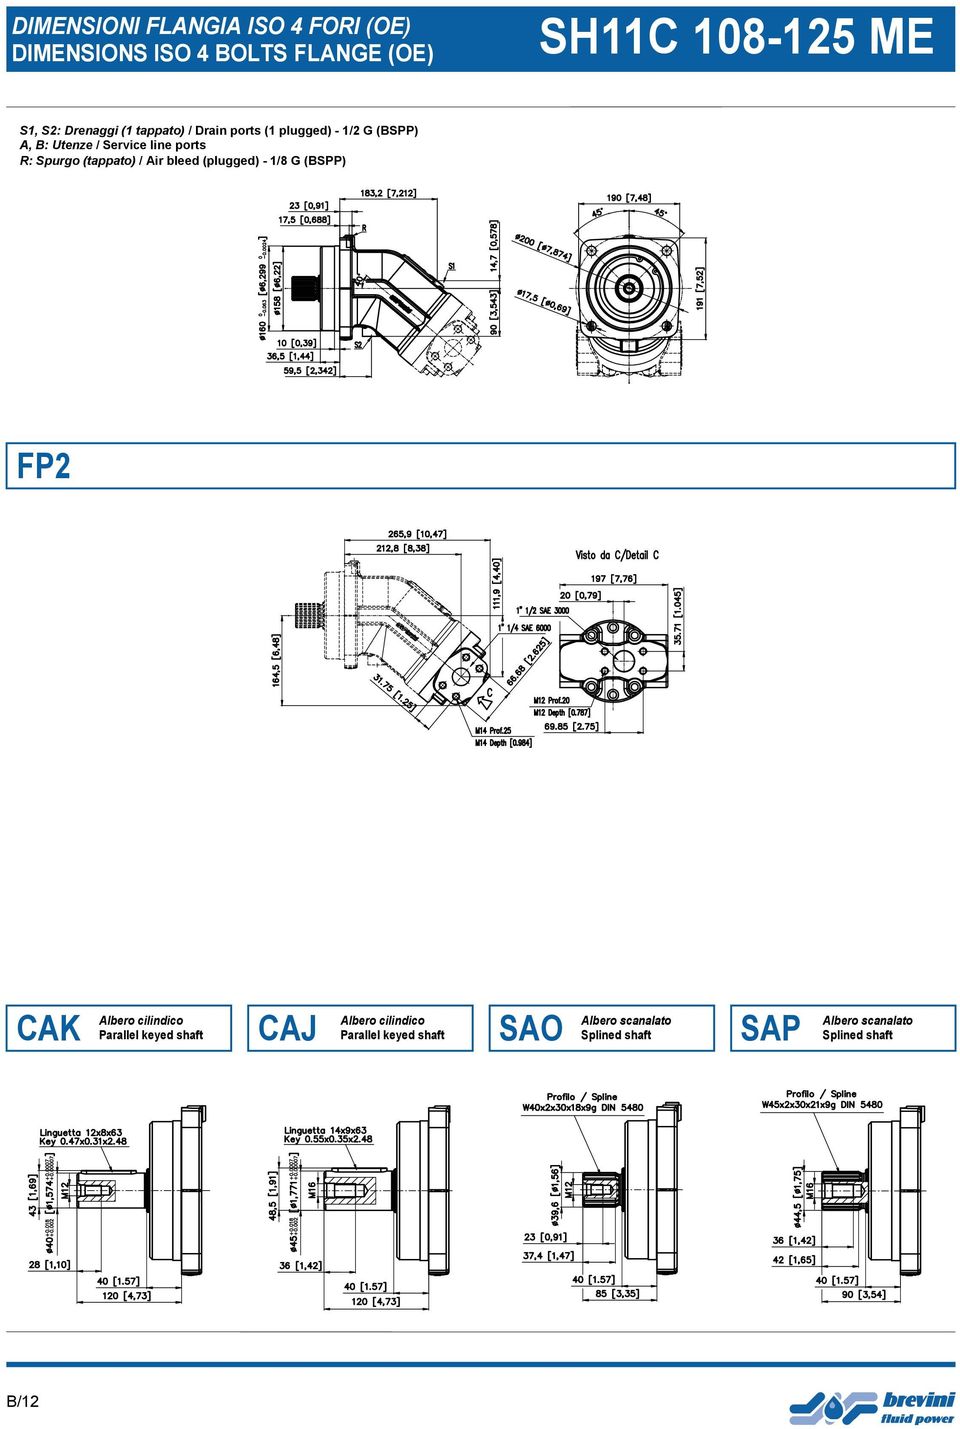 Service line ports R: Spurgo (tappato) / Air bleed (plugged) - 1/8 G (BSPP) FP2 CAK